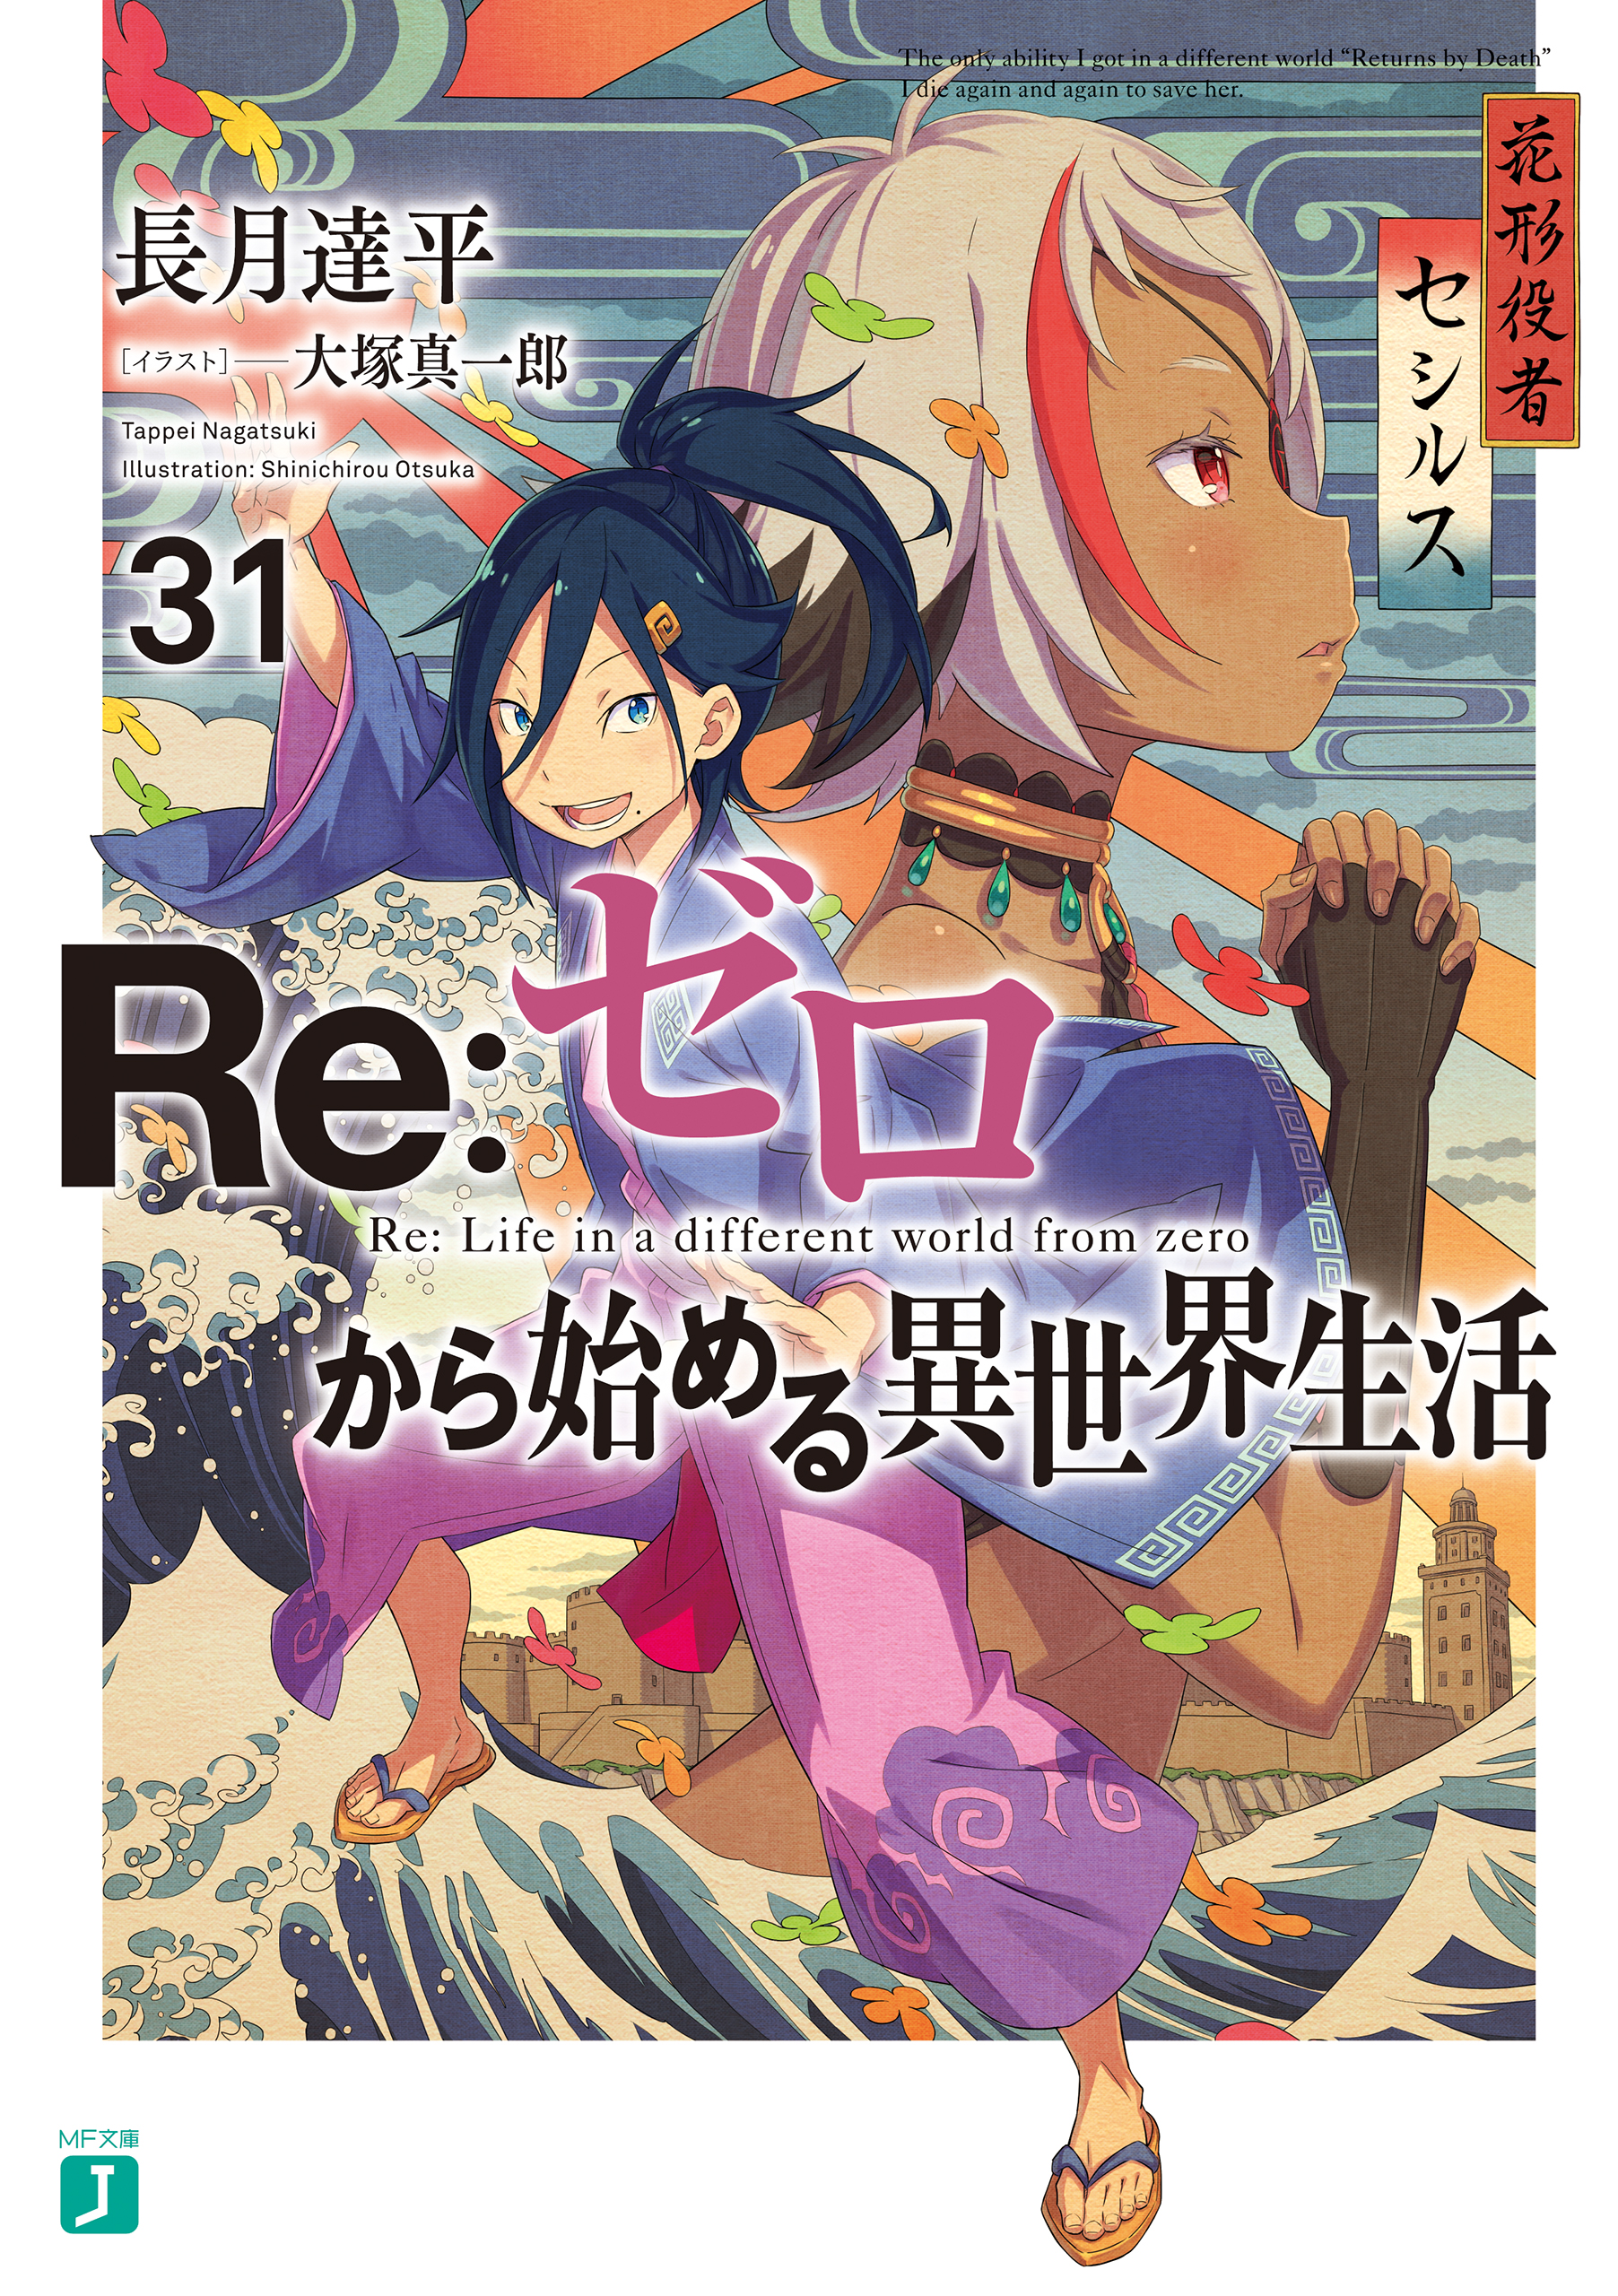 Re:ゼロから始める異世界生活 リゼロ 小説 36冊セット 全巻 - 文学/小説